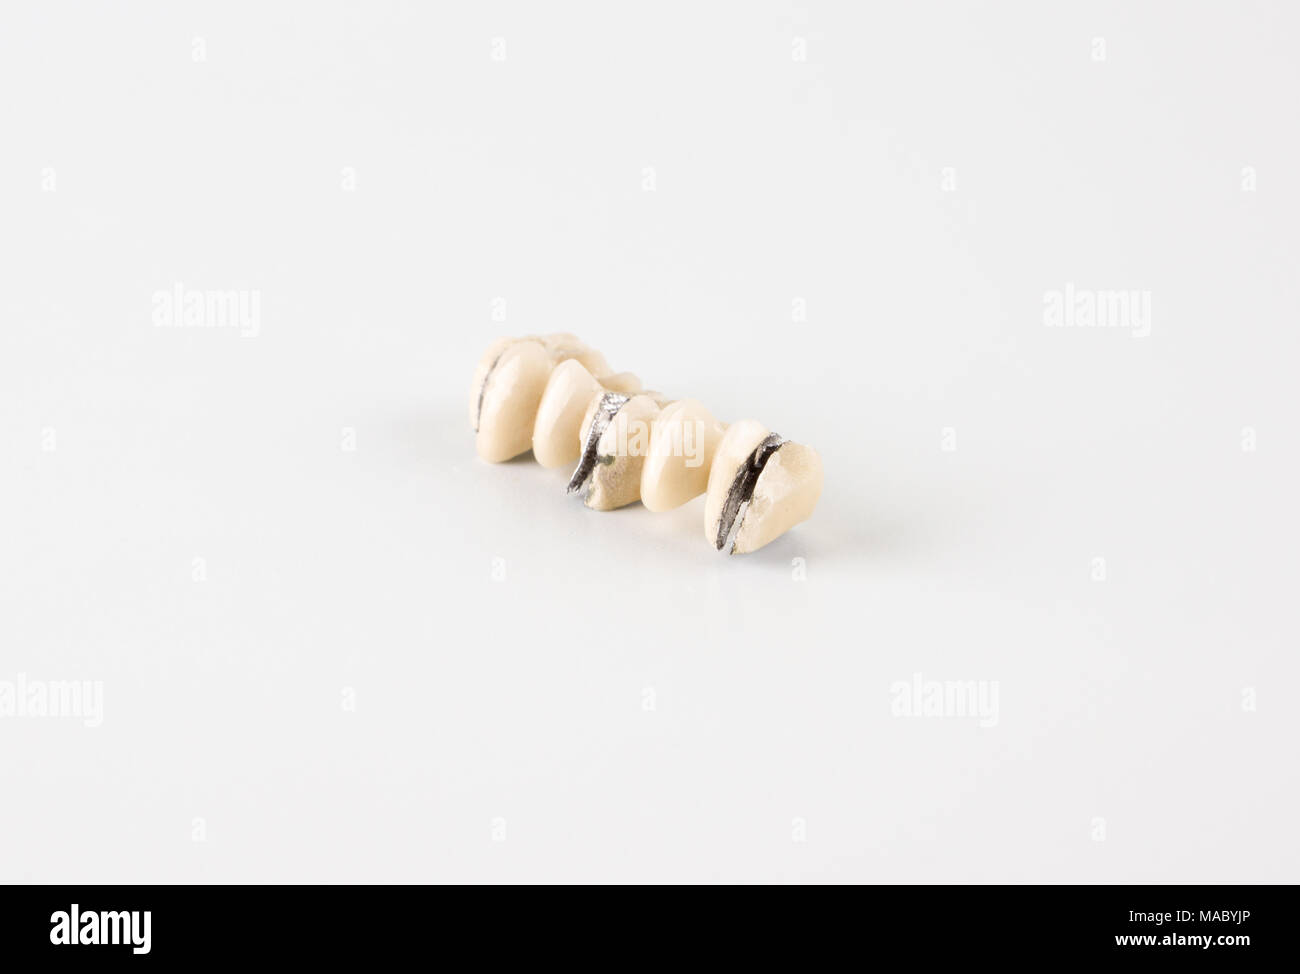 Denture damage from ceramic mass on a white background Stock Photo